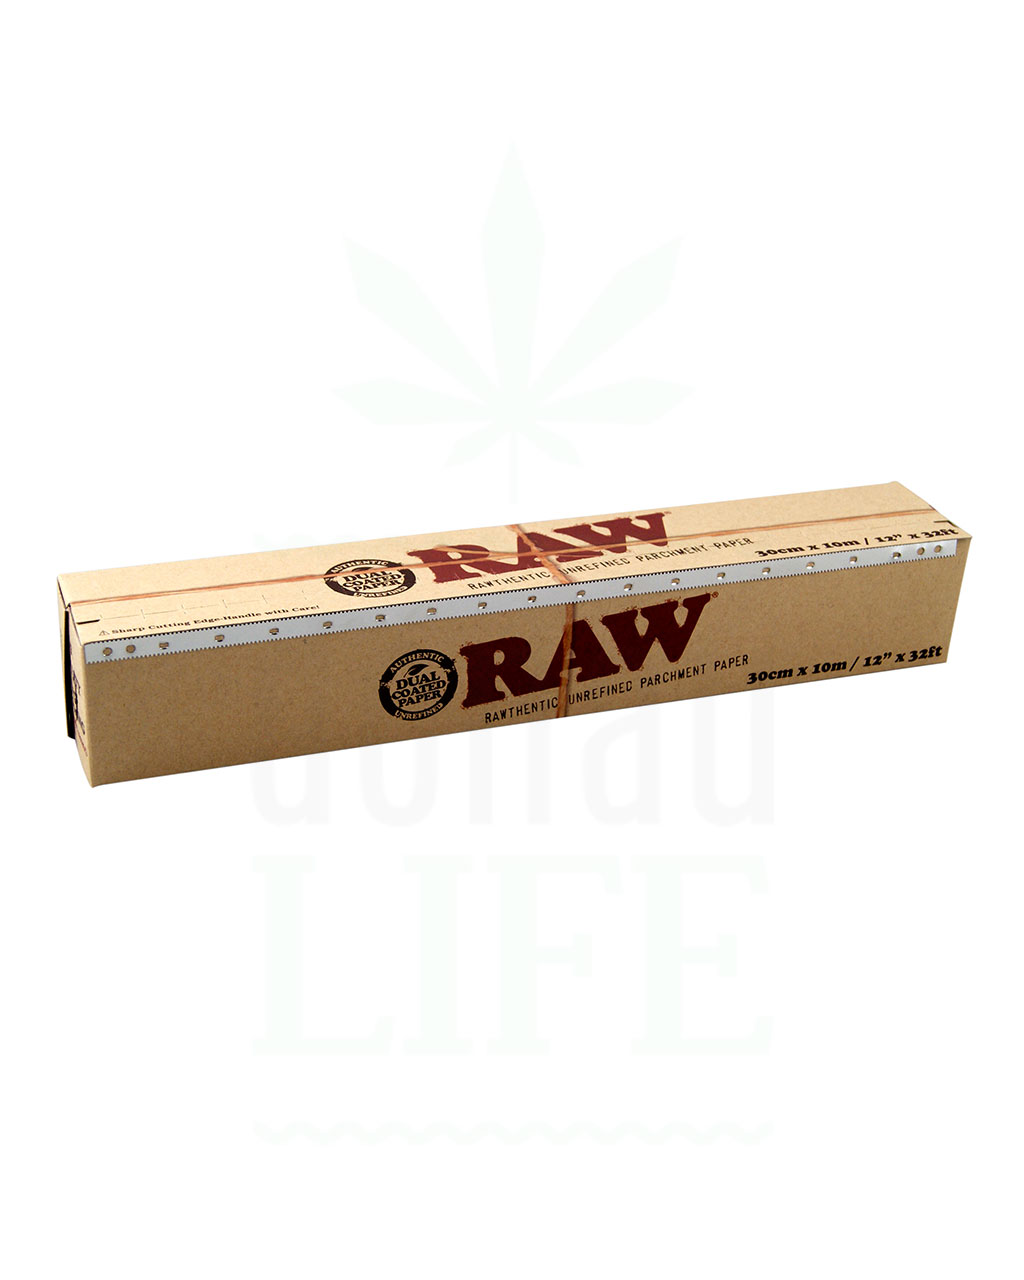 https://www.donaulife.com/wp-content/uploads/2021/03/Raw_parchment_paper_10m_front_boxed.jpg